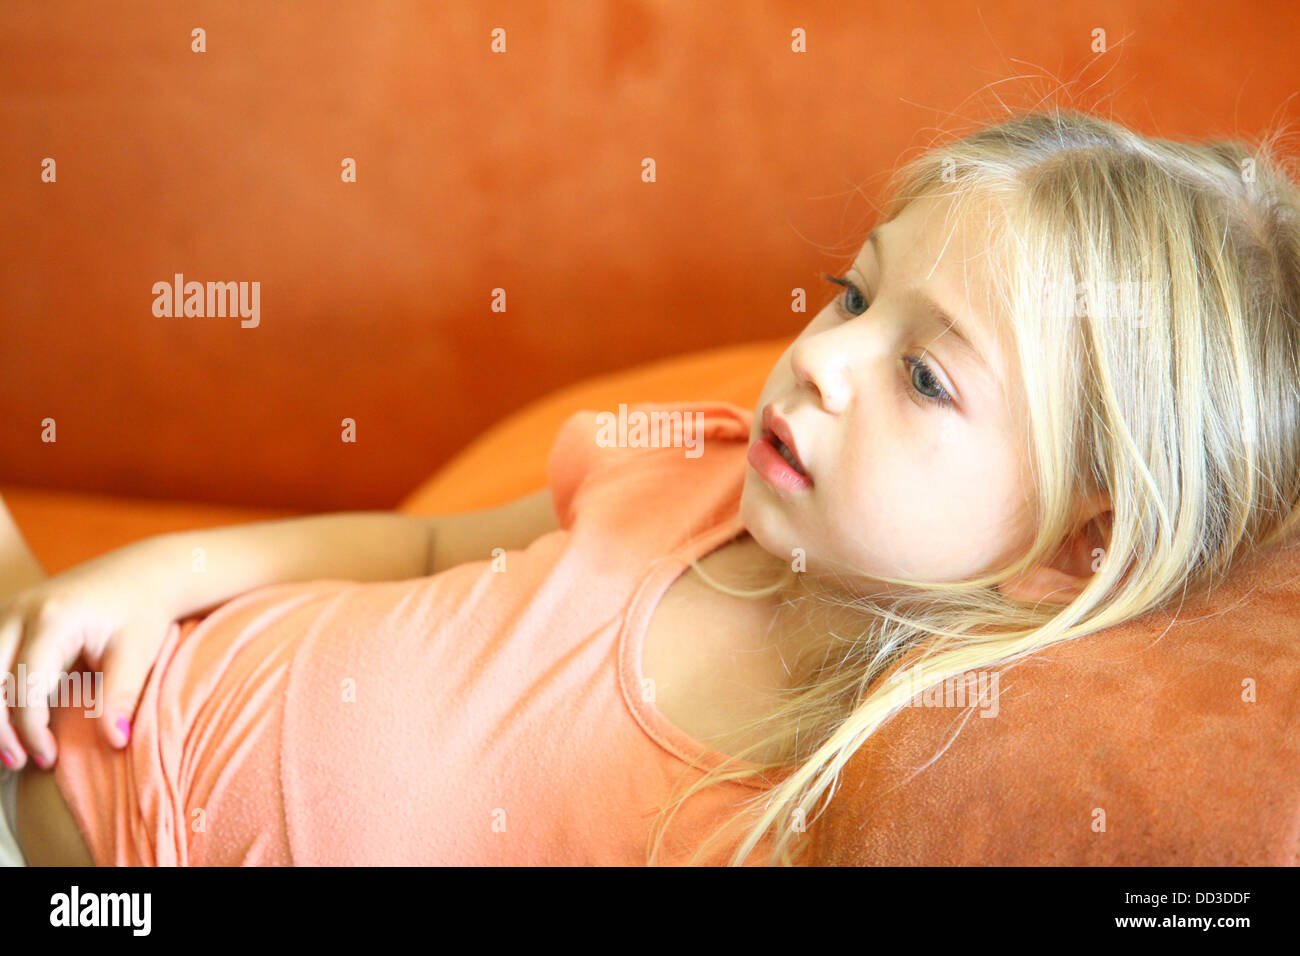 Young girl of 4 engrossed in a TV show Model release available Stock Photo